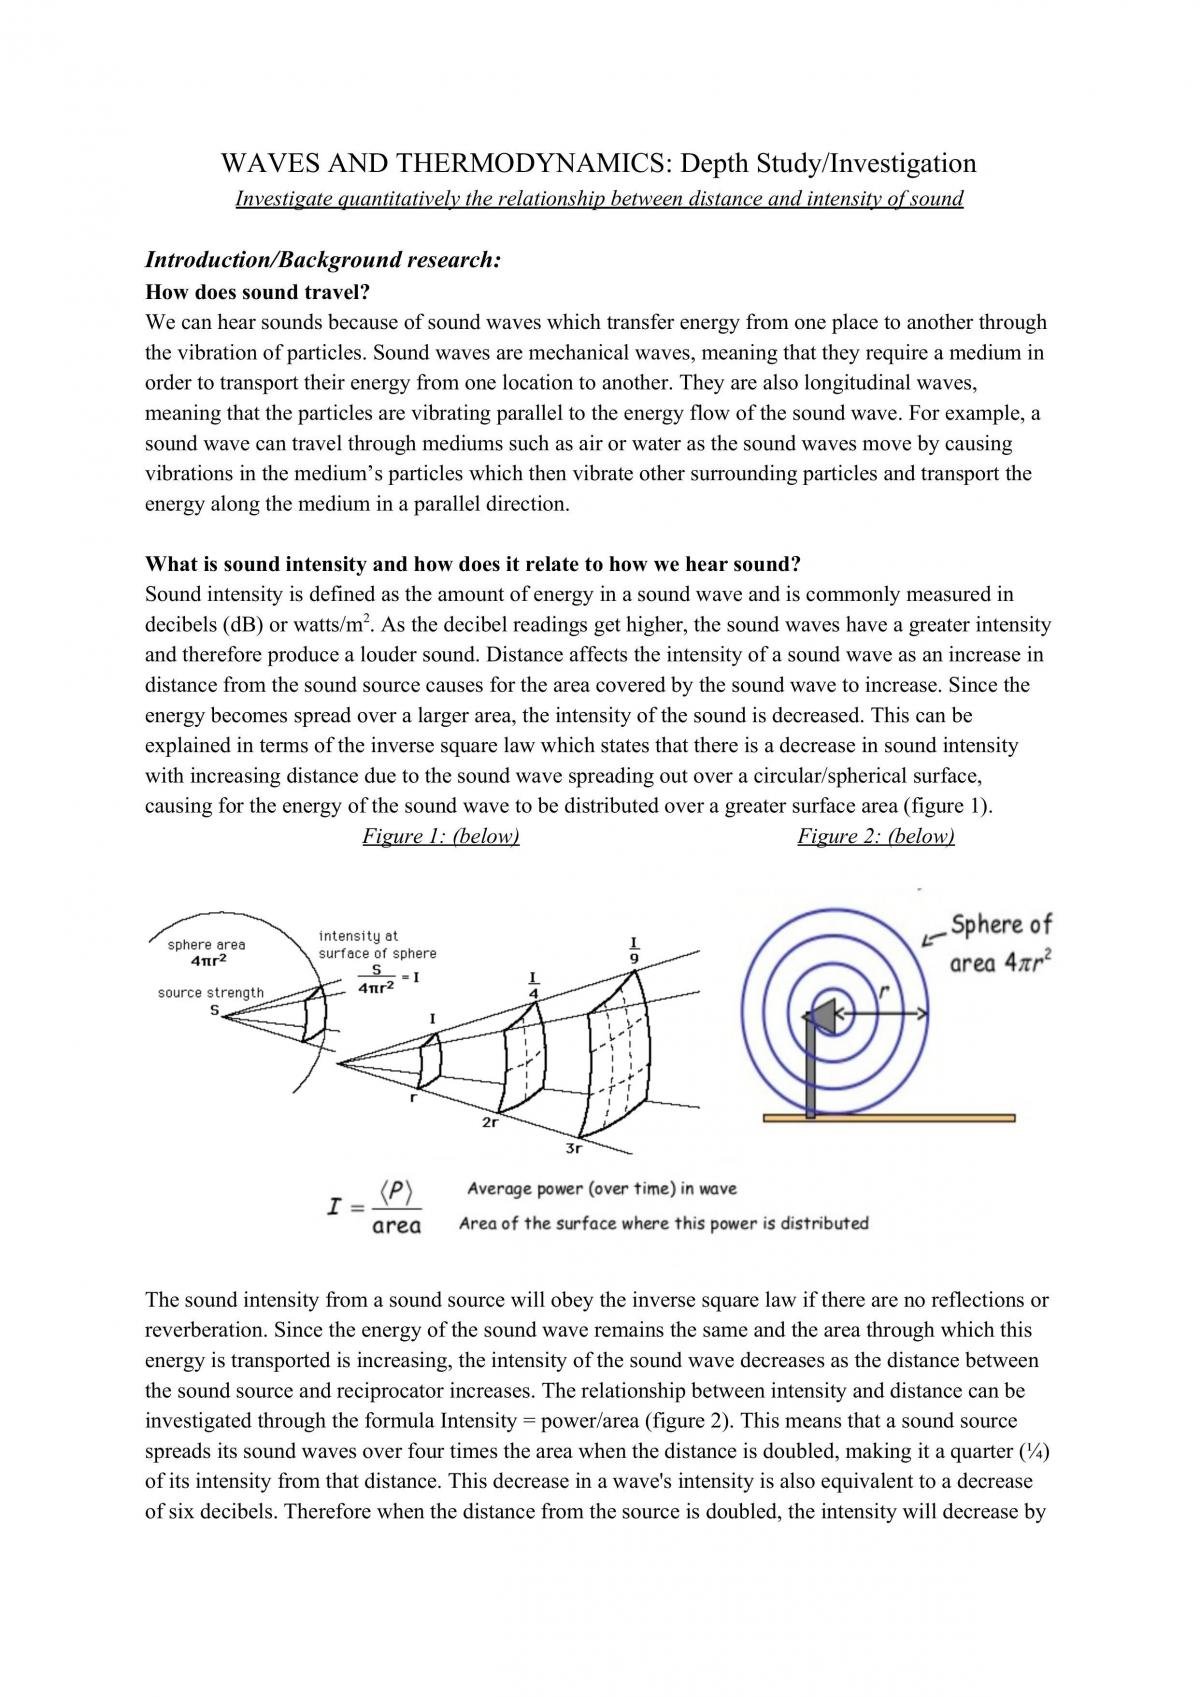 Waves and Thermodynamics - Page 1